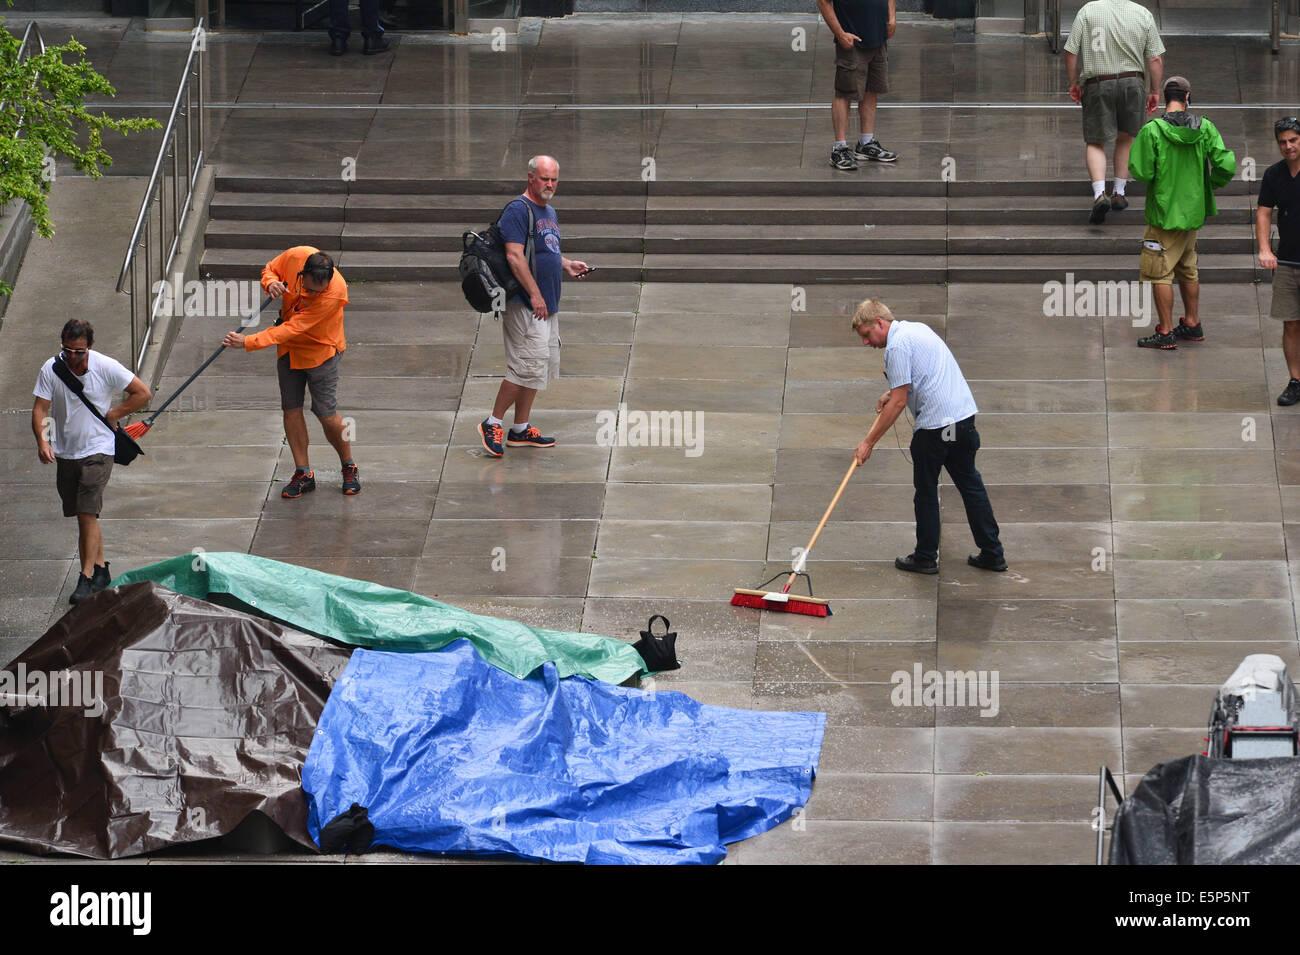 Toronto, Ontario, Canada. 4th Aug, 2014. On the movie set at 909 Bay Street in Toronto. 'Pixels' is an upcoming 2015 American 3D live-action/computer-animated film produced by Columbia Pictures and Happy Madison Productions. The film is directed by CHRIS COLUMBUS from a screenplay written by Tim Herlihy and Timothy Dowling. Main actors: ADAM SANDLER, KEVIN JAMES, JOSH GAD, PETER DINKLAGE, MICHELLE MONAGHAN, BRIAN COX, ASHLEY BENSON, and JANE KRAKOWSKI.Principal photography on the film began on June 2, 2014 in Toronto, Canada. Credit:  ZUMA Press, Inc./Alamy Live News Stock Photo